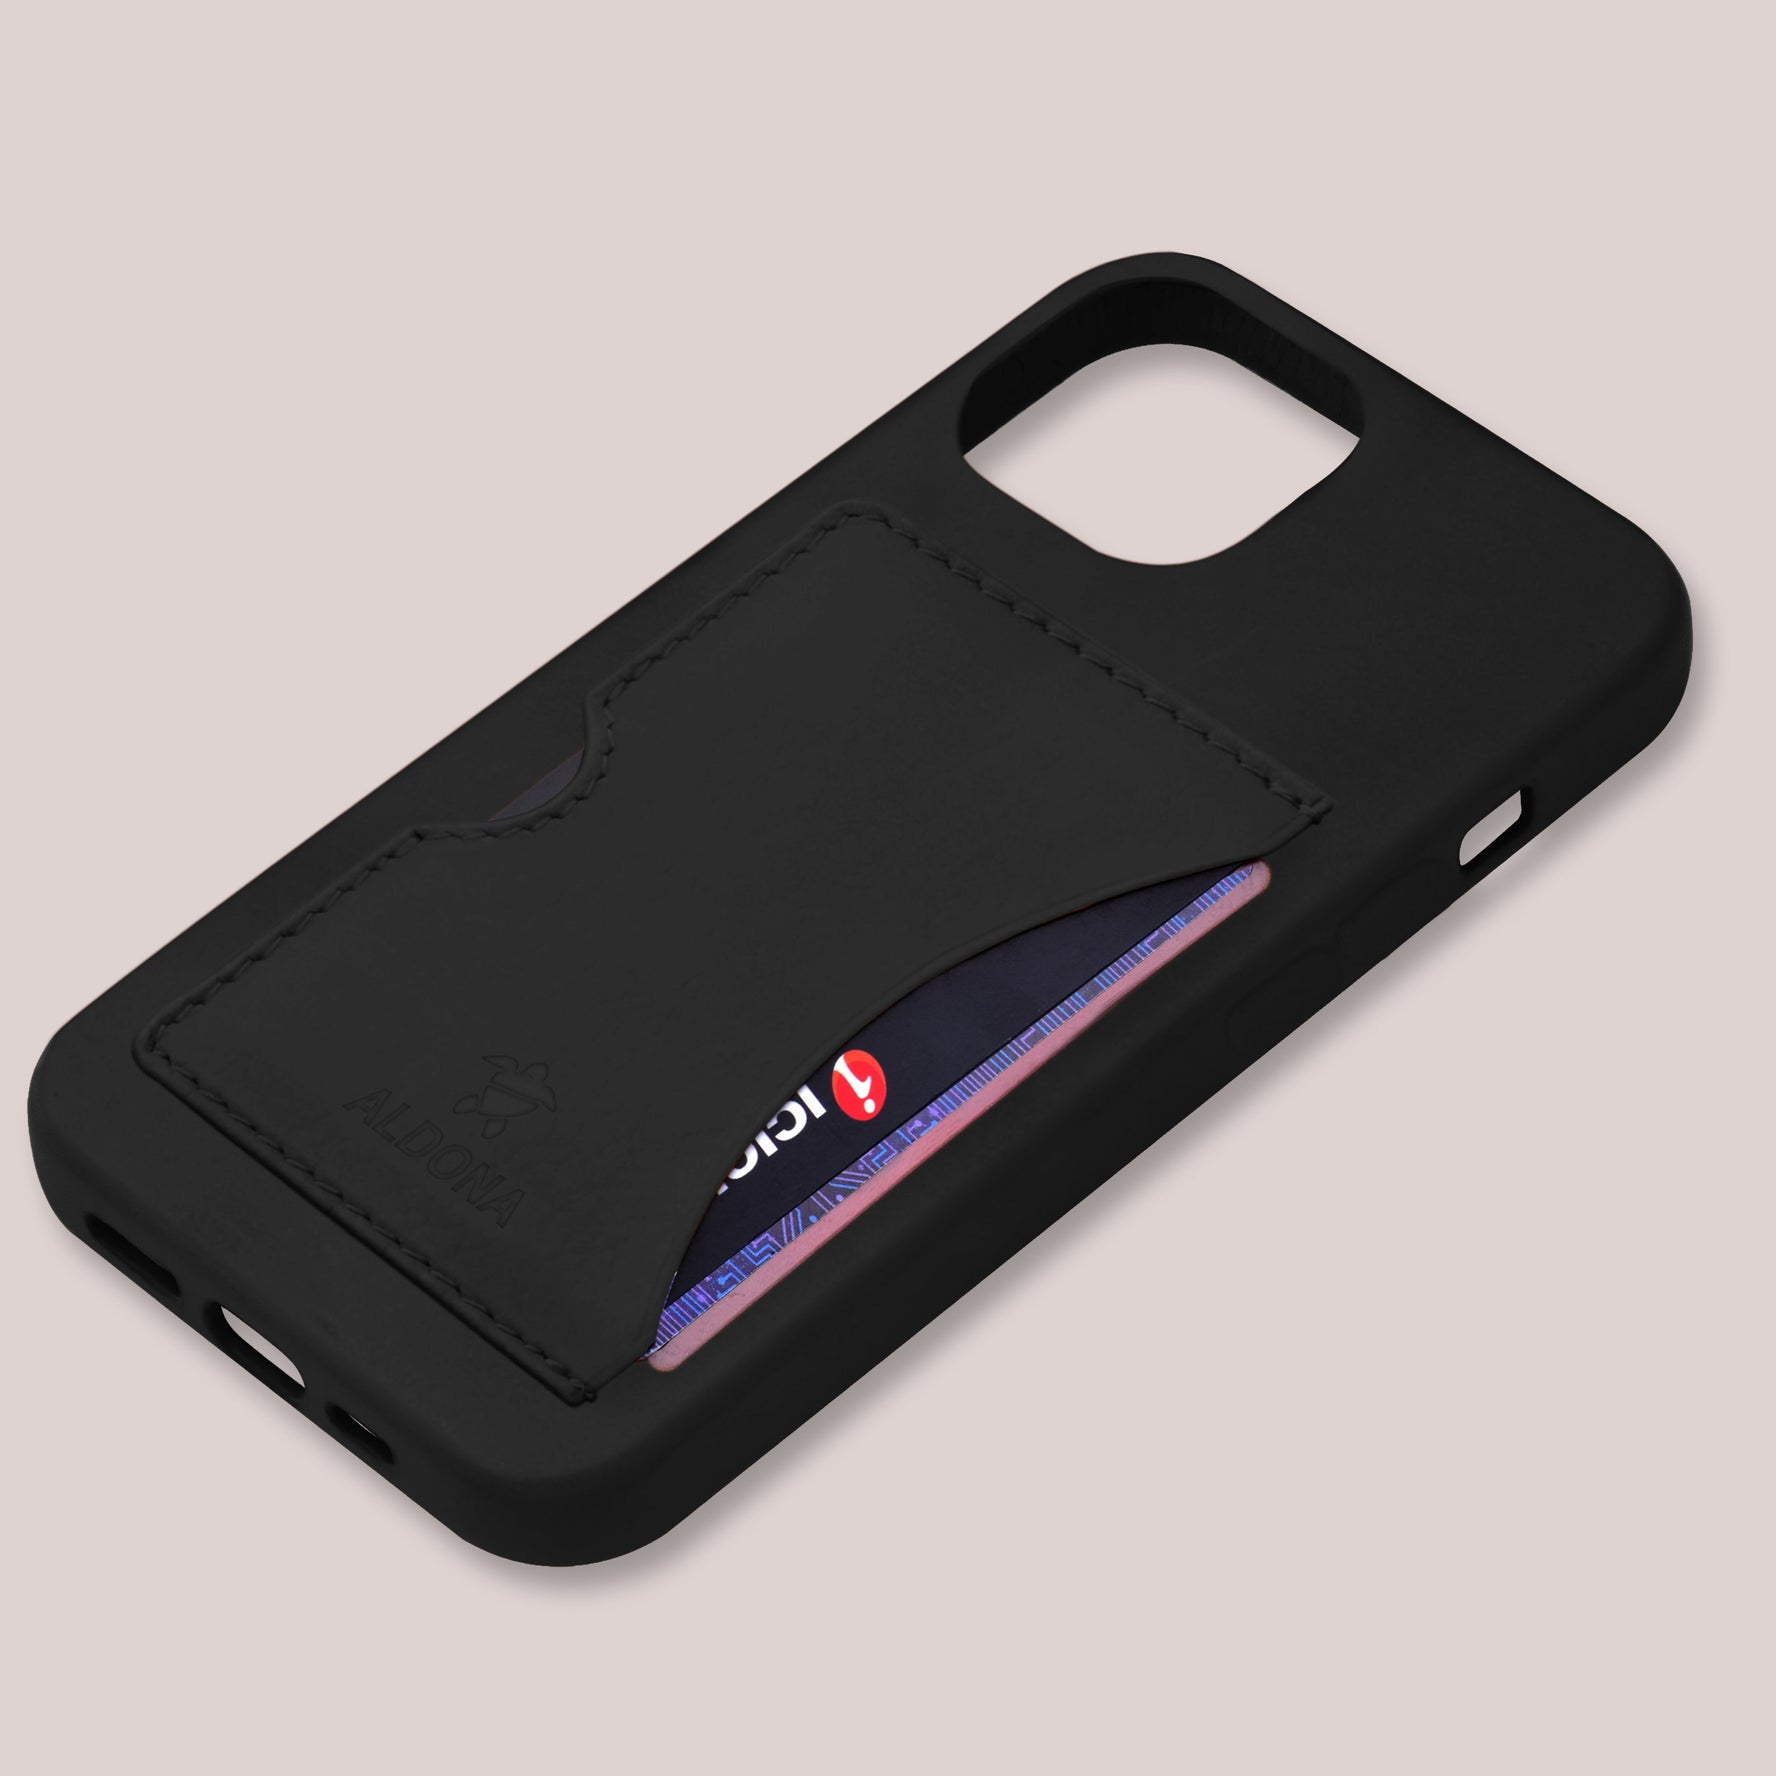 Baxter Card Case for iPhone 13 series - Onyx Black